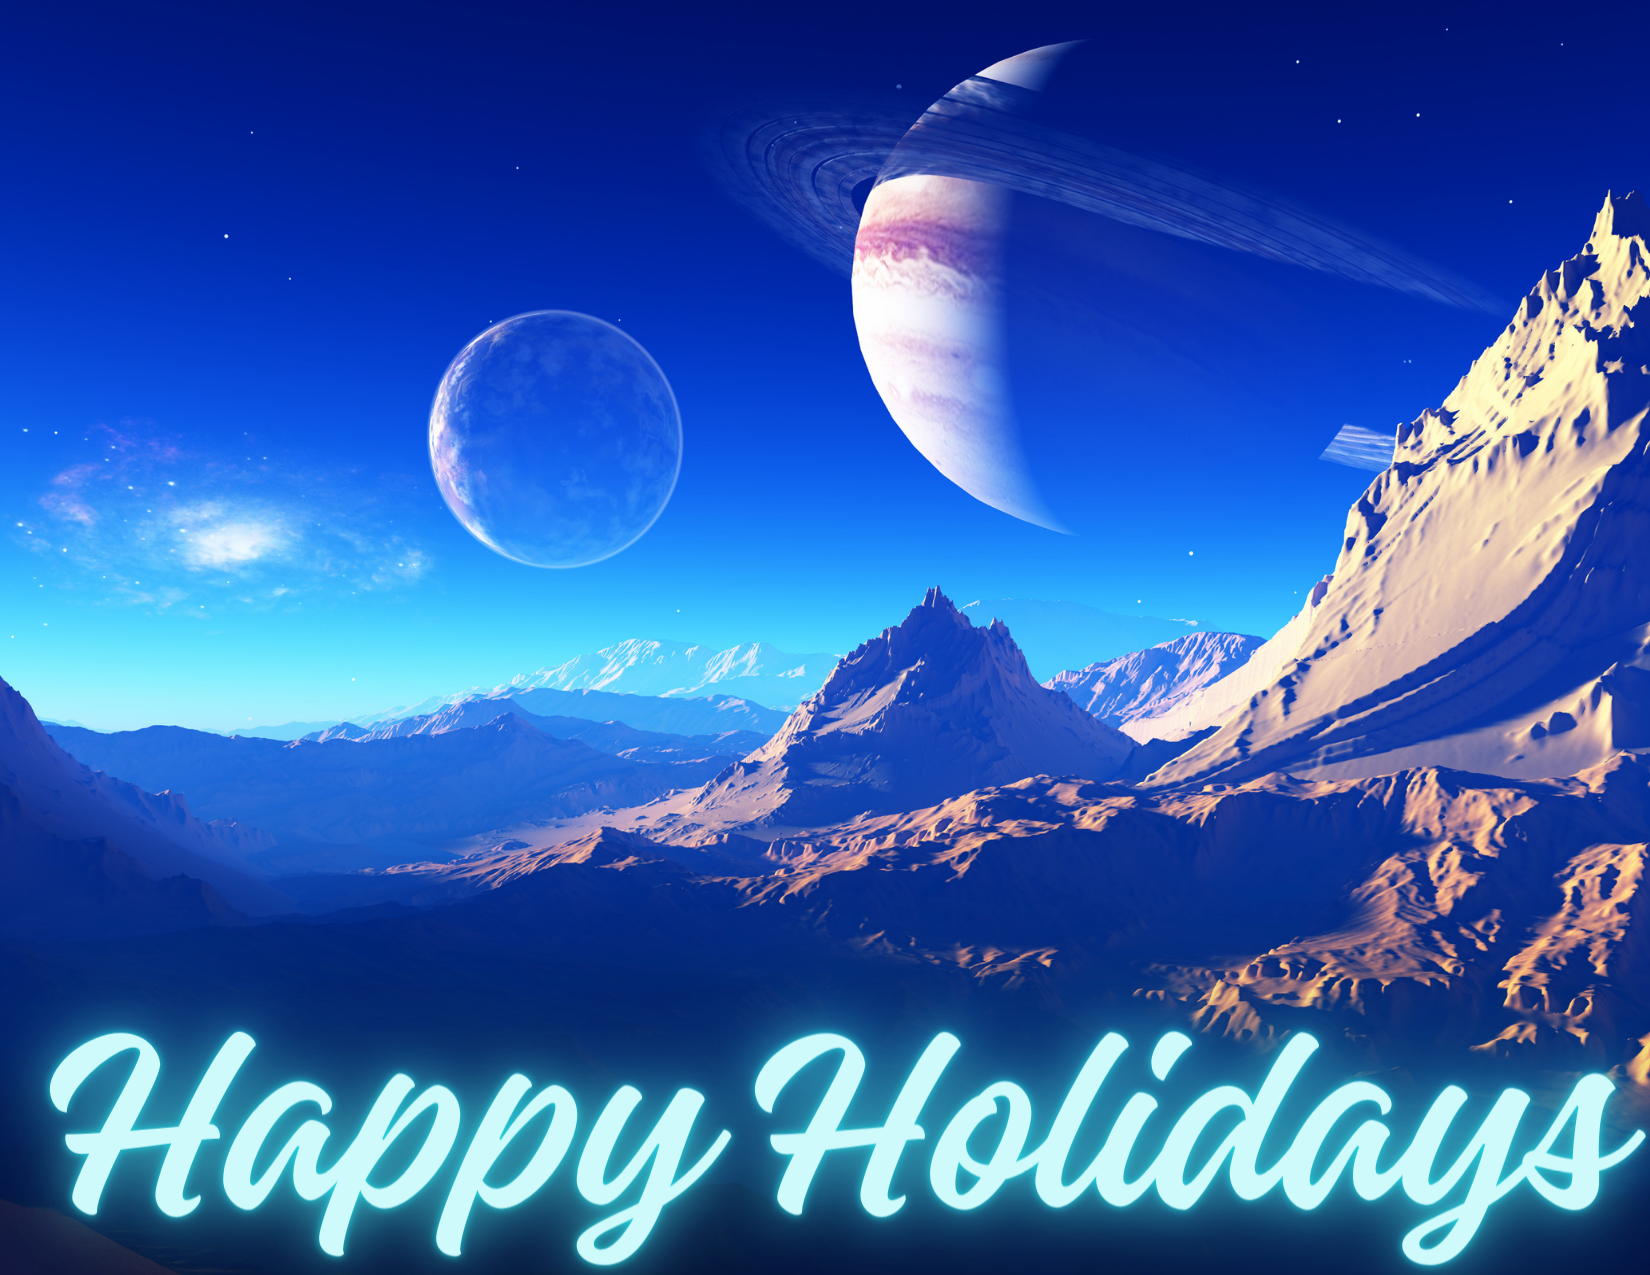 A spacey scene with the words Happy Holidays!